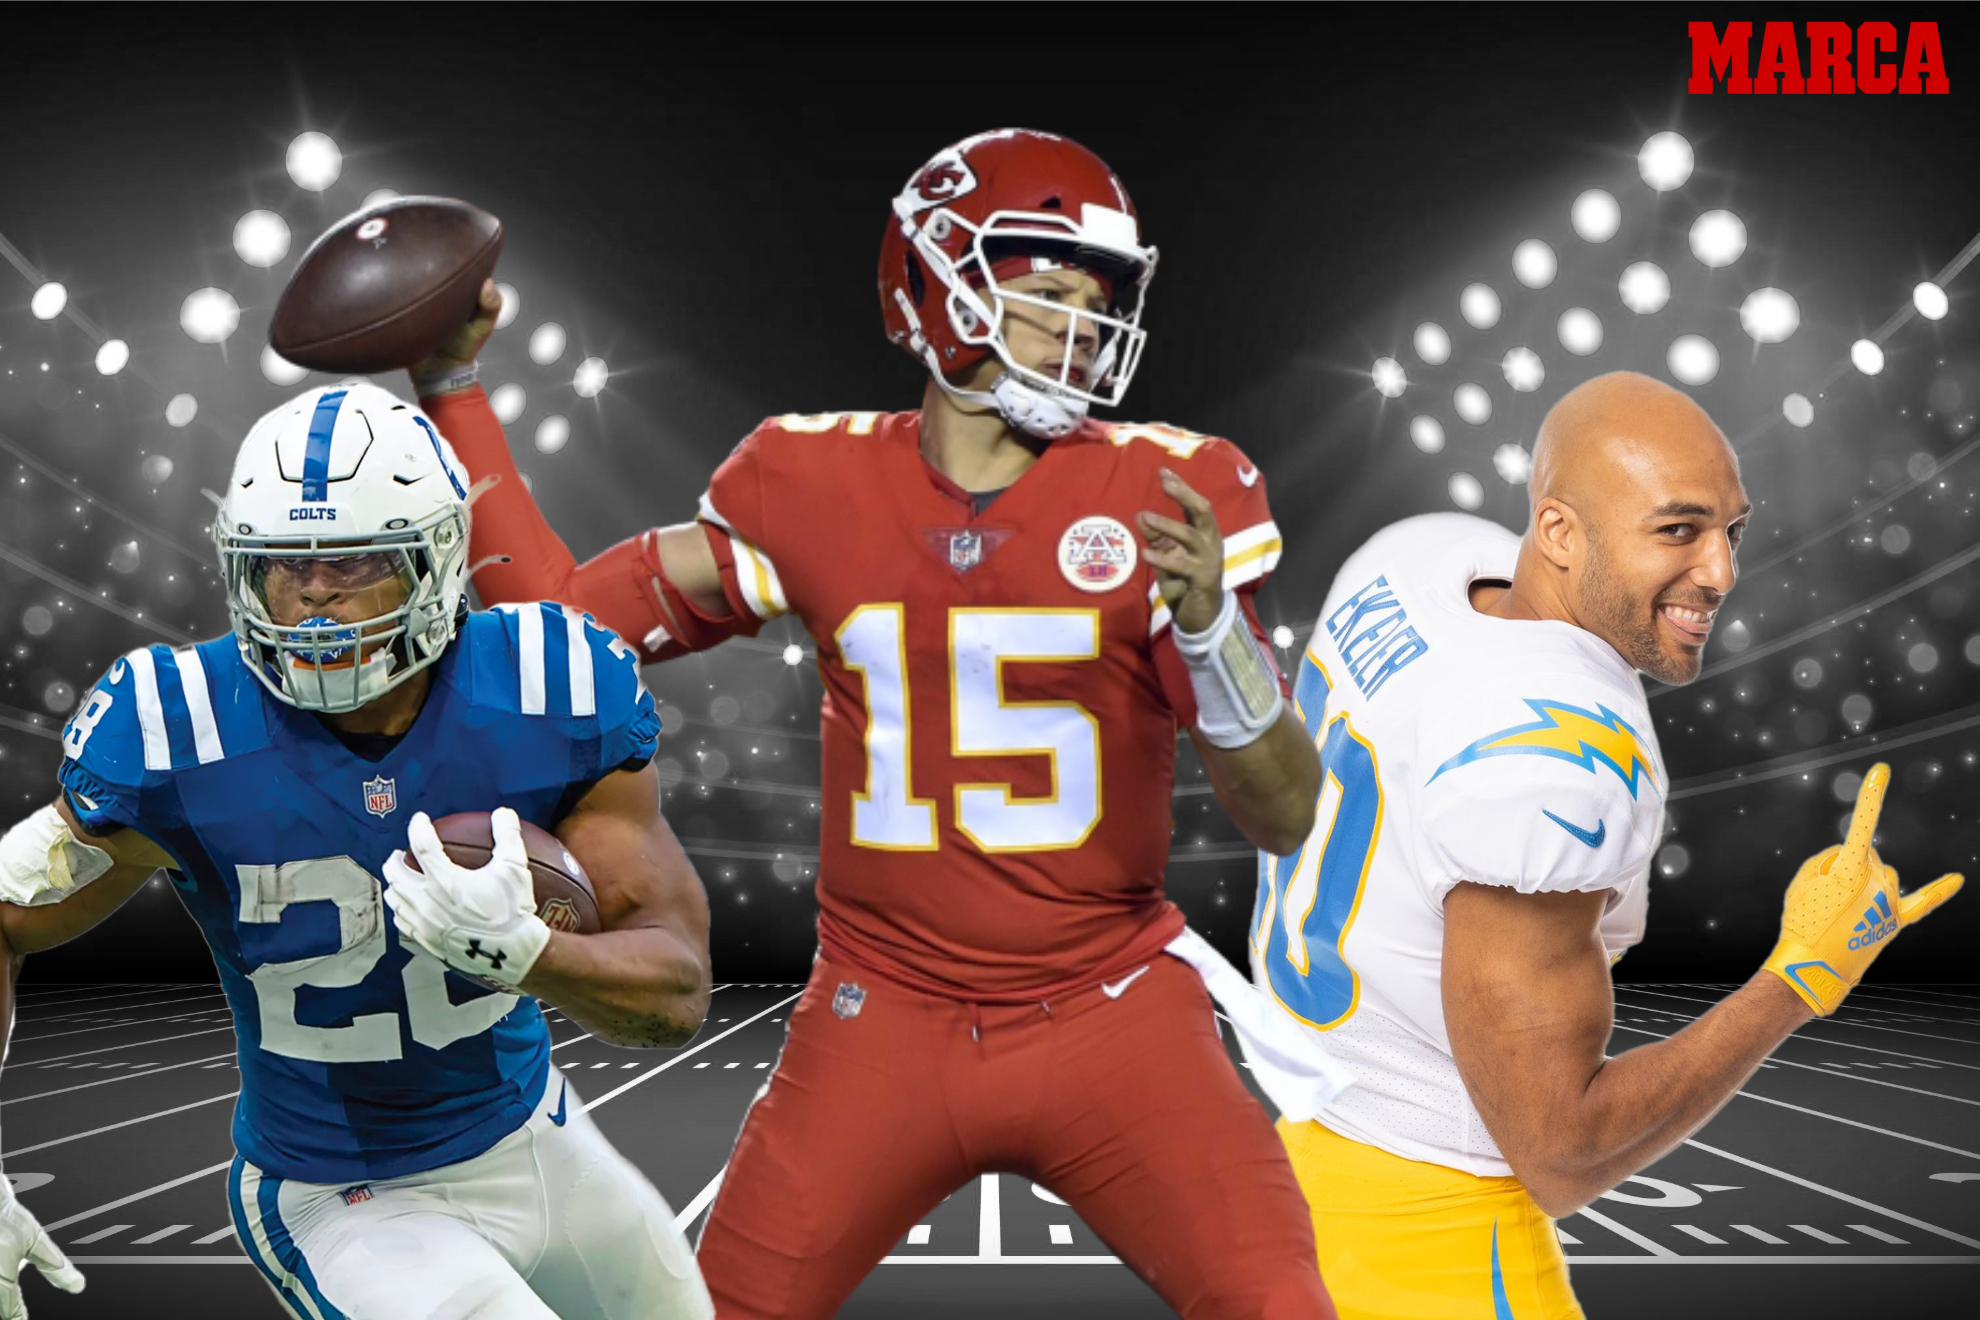 Jonathan Taylor (RB), Patrick Mahomes (QB), and Austin Ekeler(WR) are some of this year's standouts in their respective positions. -MARCA